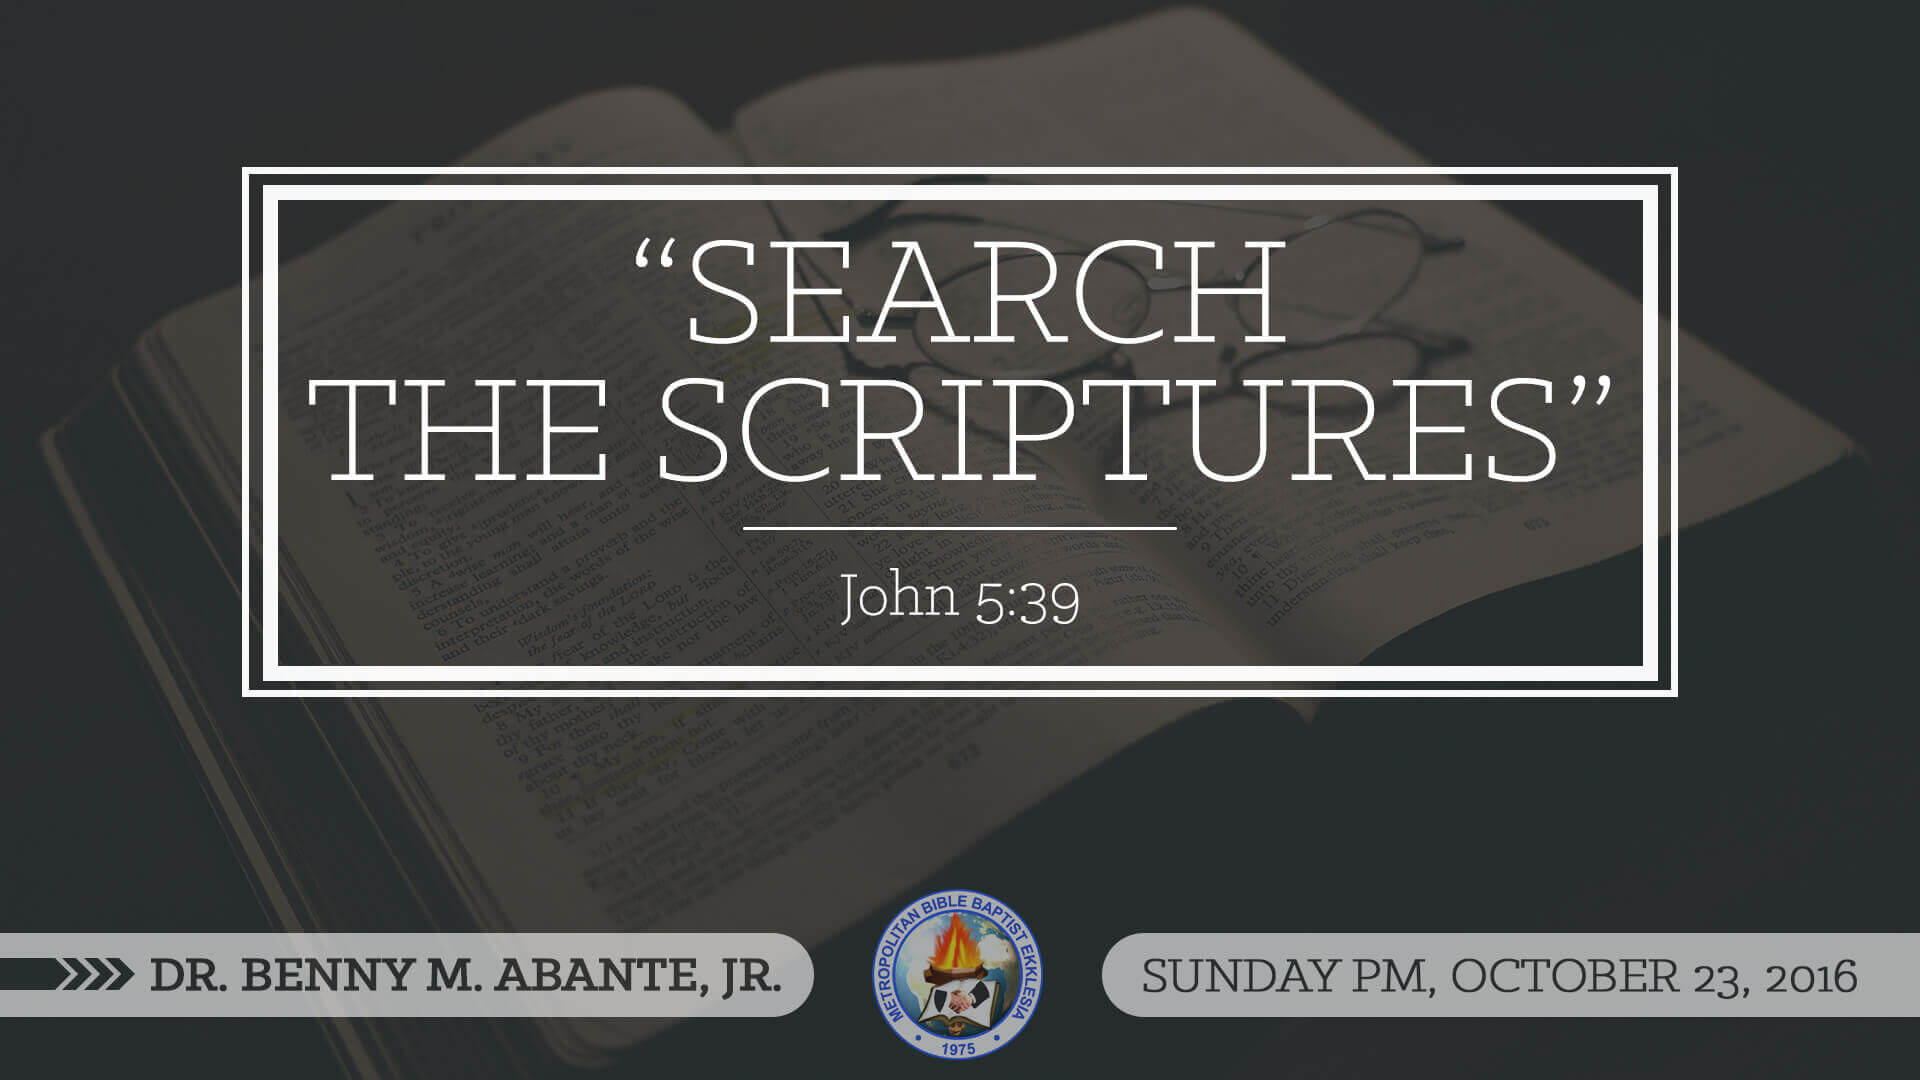 Search The Scriptures | MBBE.org